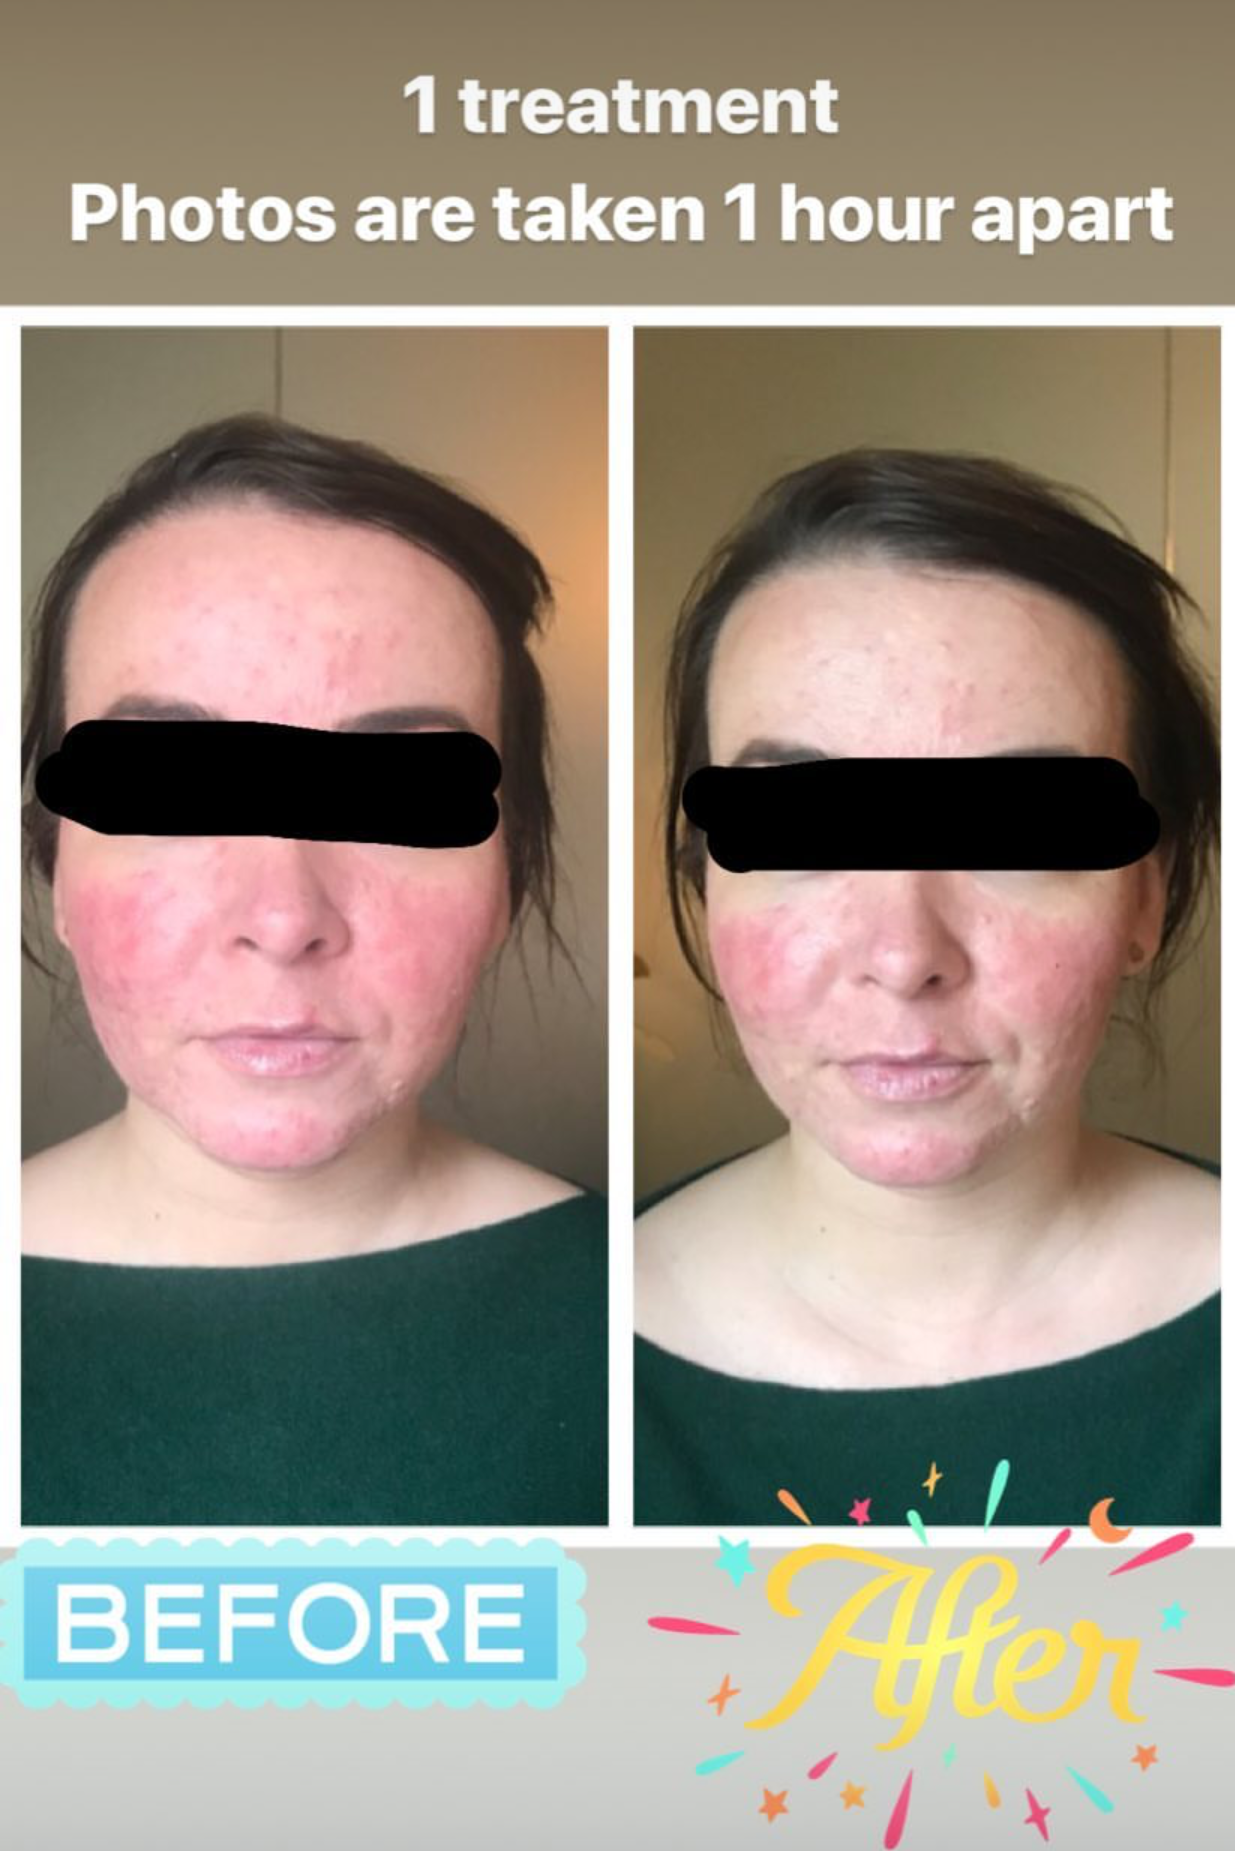  SuJok acupuncture in Vancouver used to treat skin-related issues. Improvement is significantly noticeable just one hour apart from photo capture.  